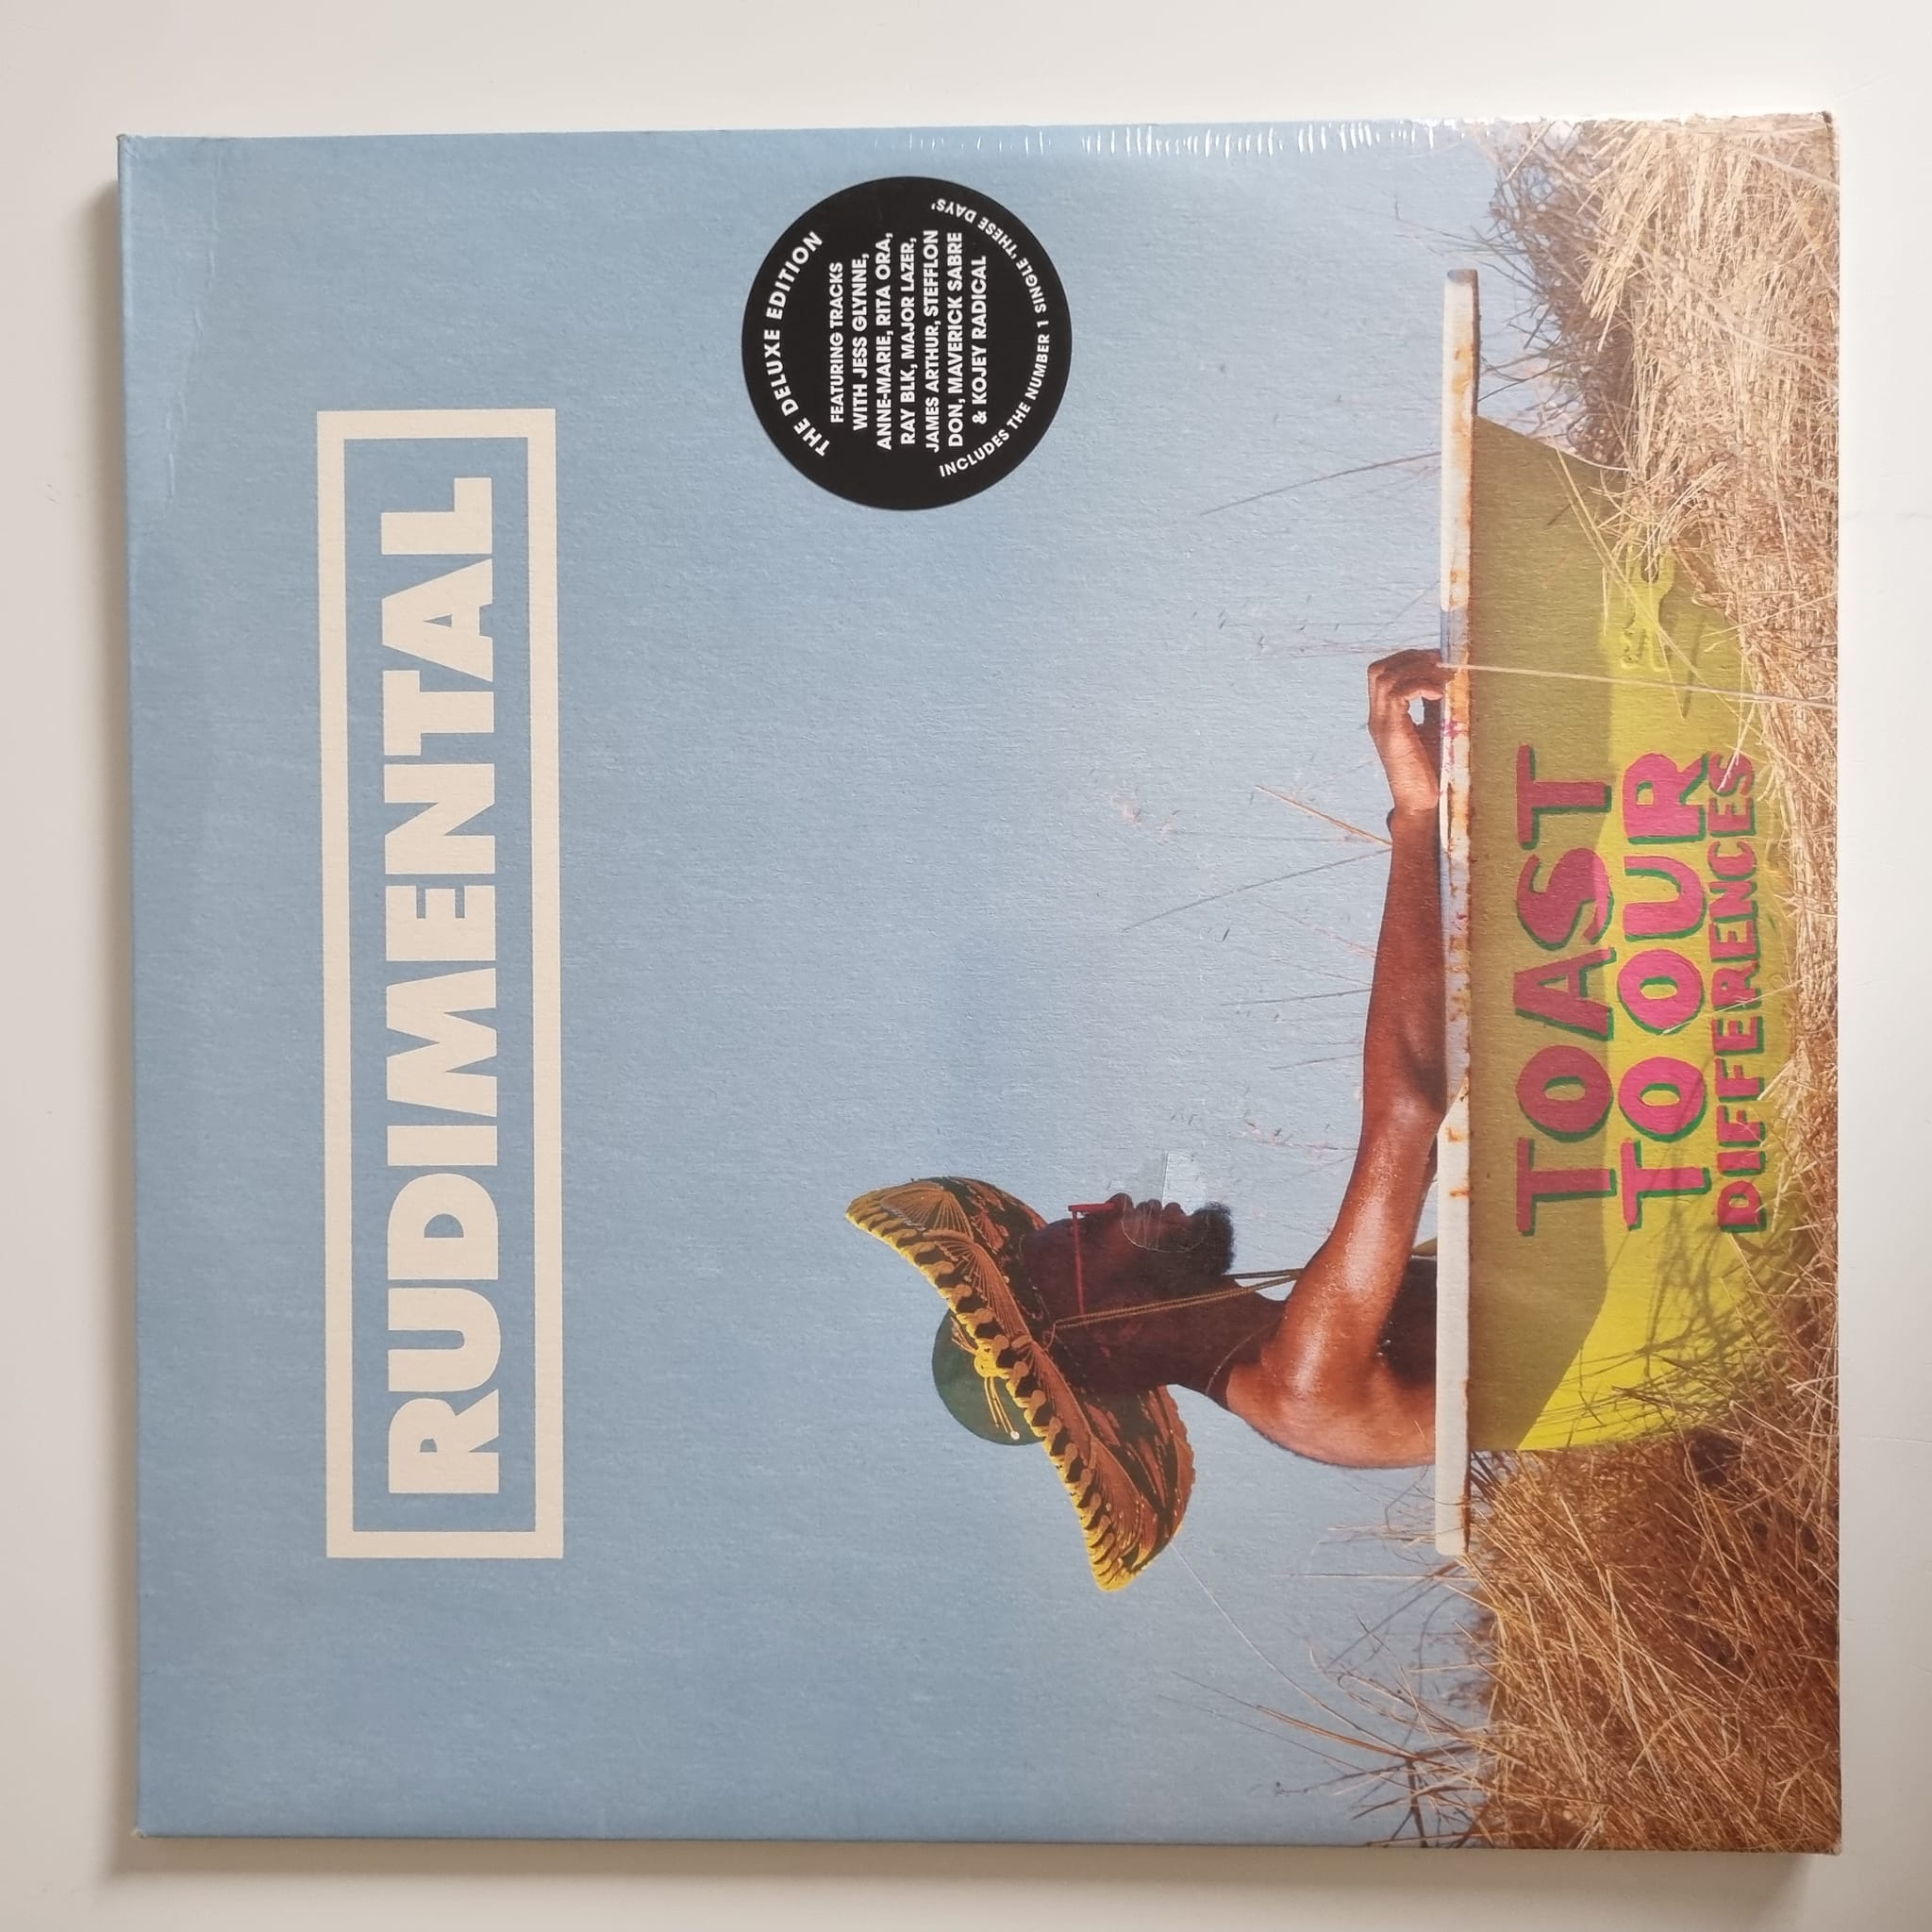 Buy this rare Rudimental record by clicking here